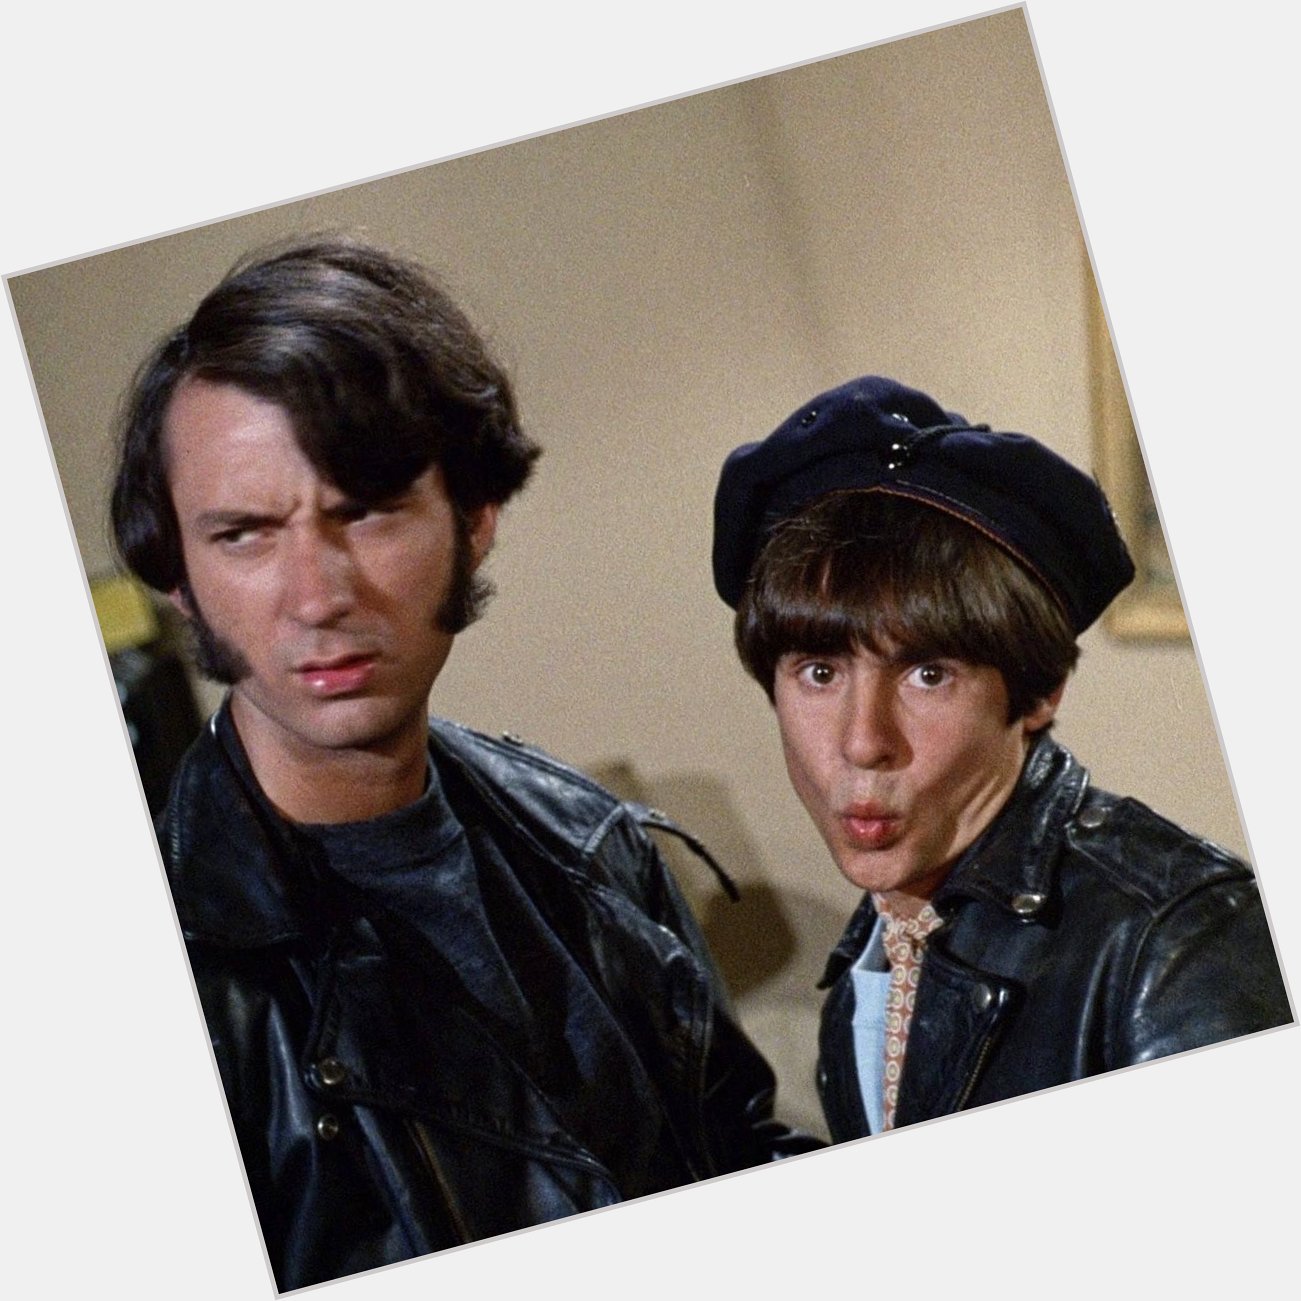 Happy Birthday to Monkees Mike Nesmith & Davy Jones (yes they shared the same birthday). 